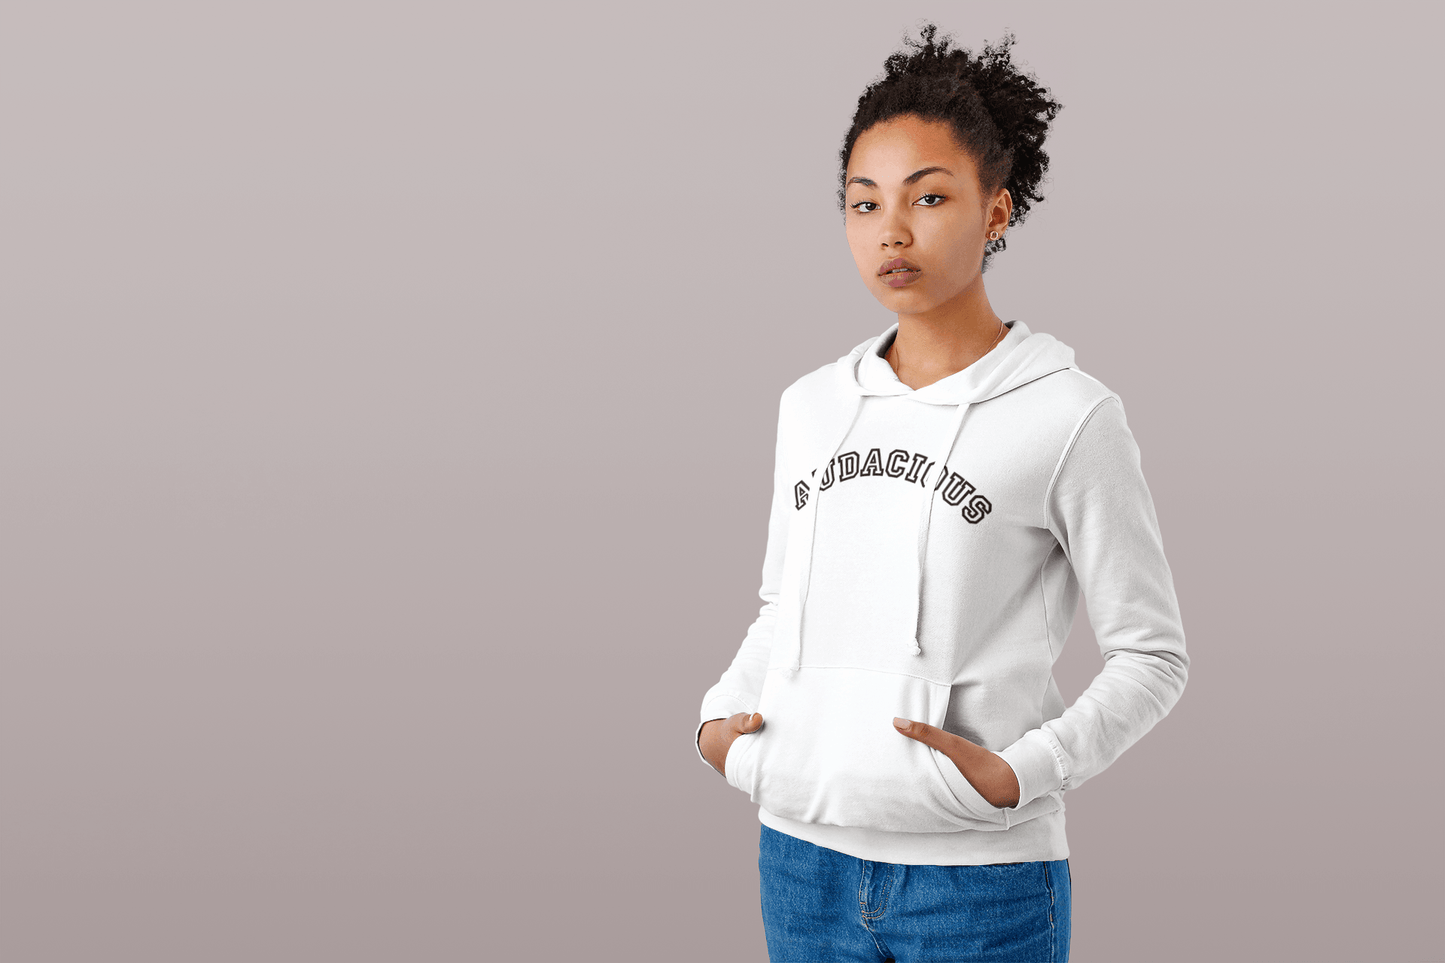 Audacious Hoodie - Sharp Tact Kreativ | Tees & Gifts with Encouraging Messages to Brighten Your Day with a Bit of Wit